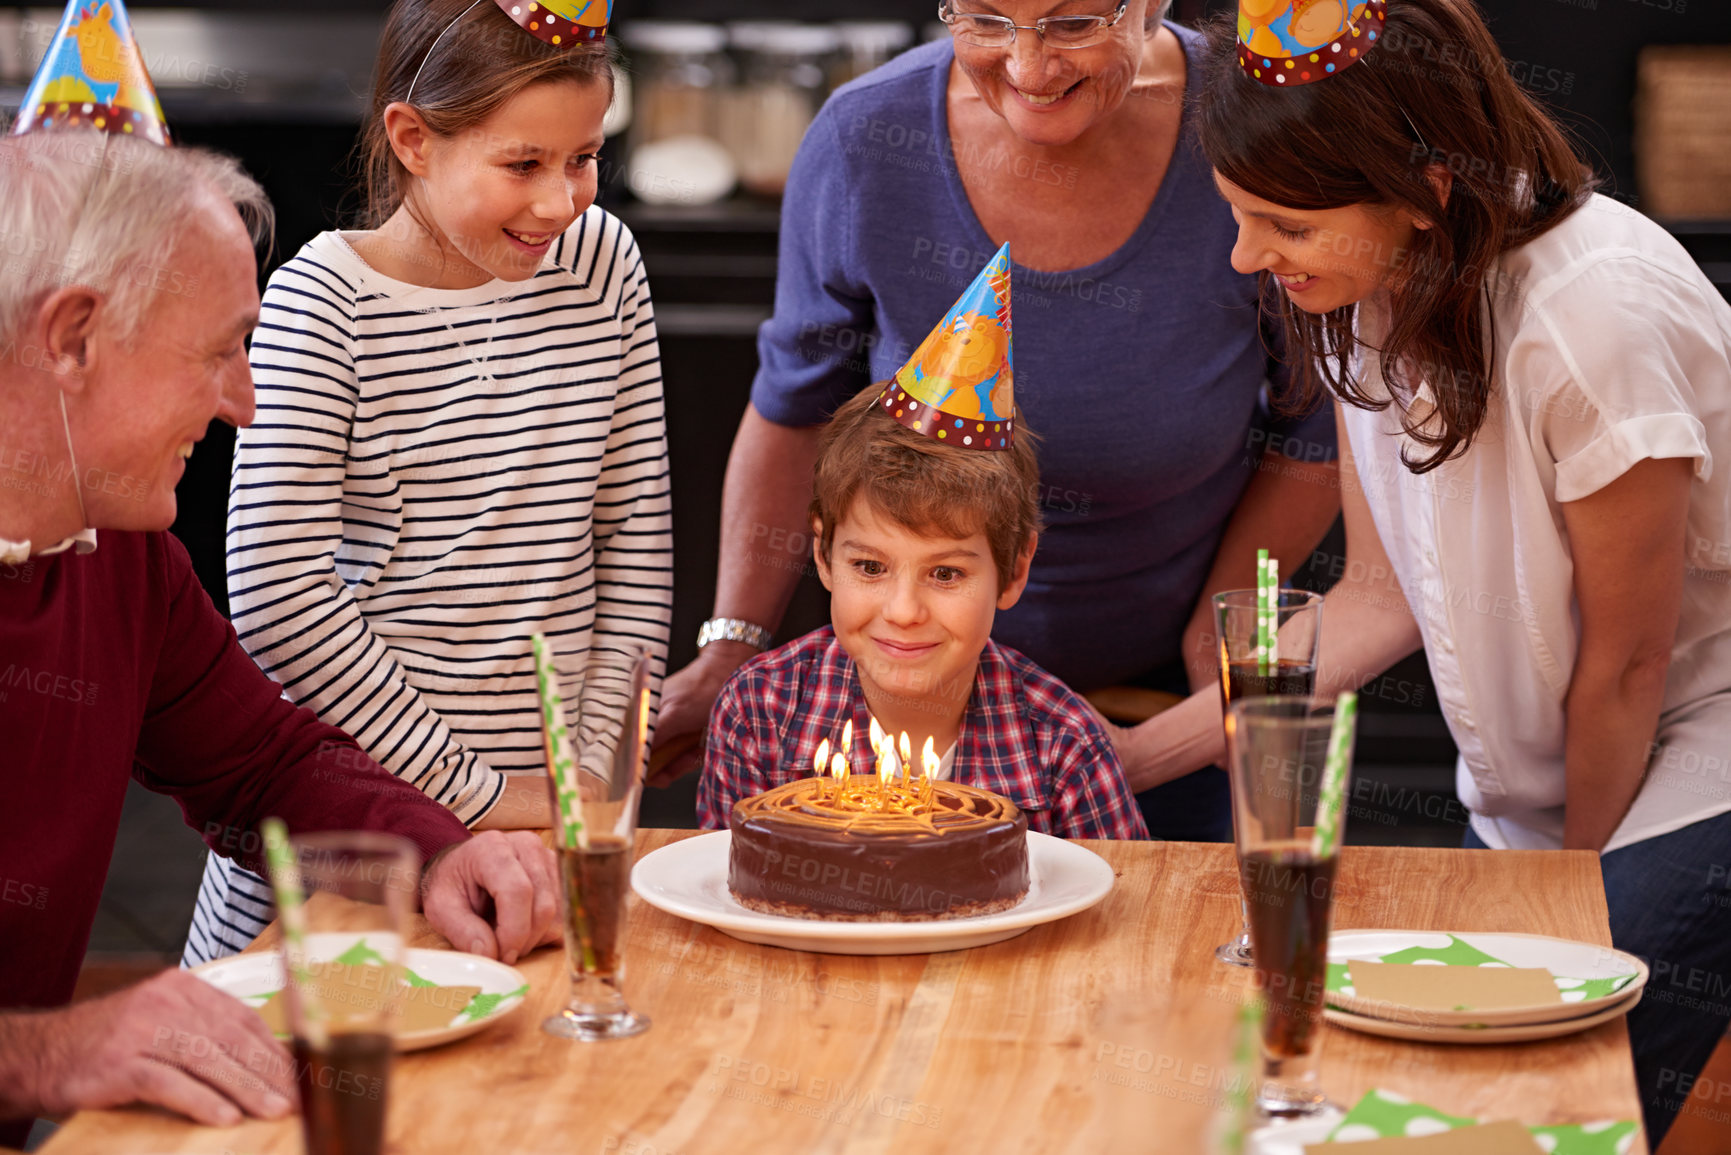 Buy stock photo Family, birthday cake and smile of boy, parents and grandparents together with youth and candles. Happy, kid and dessert with children and celebration with event food and party hats at a table